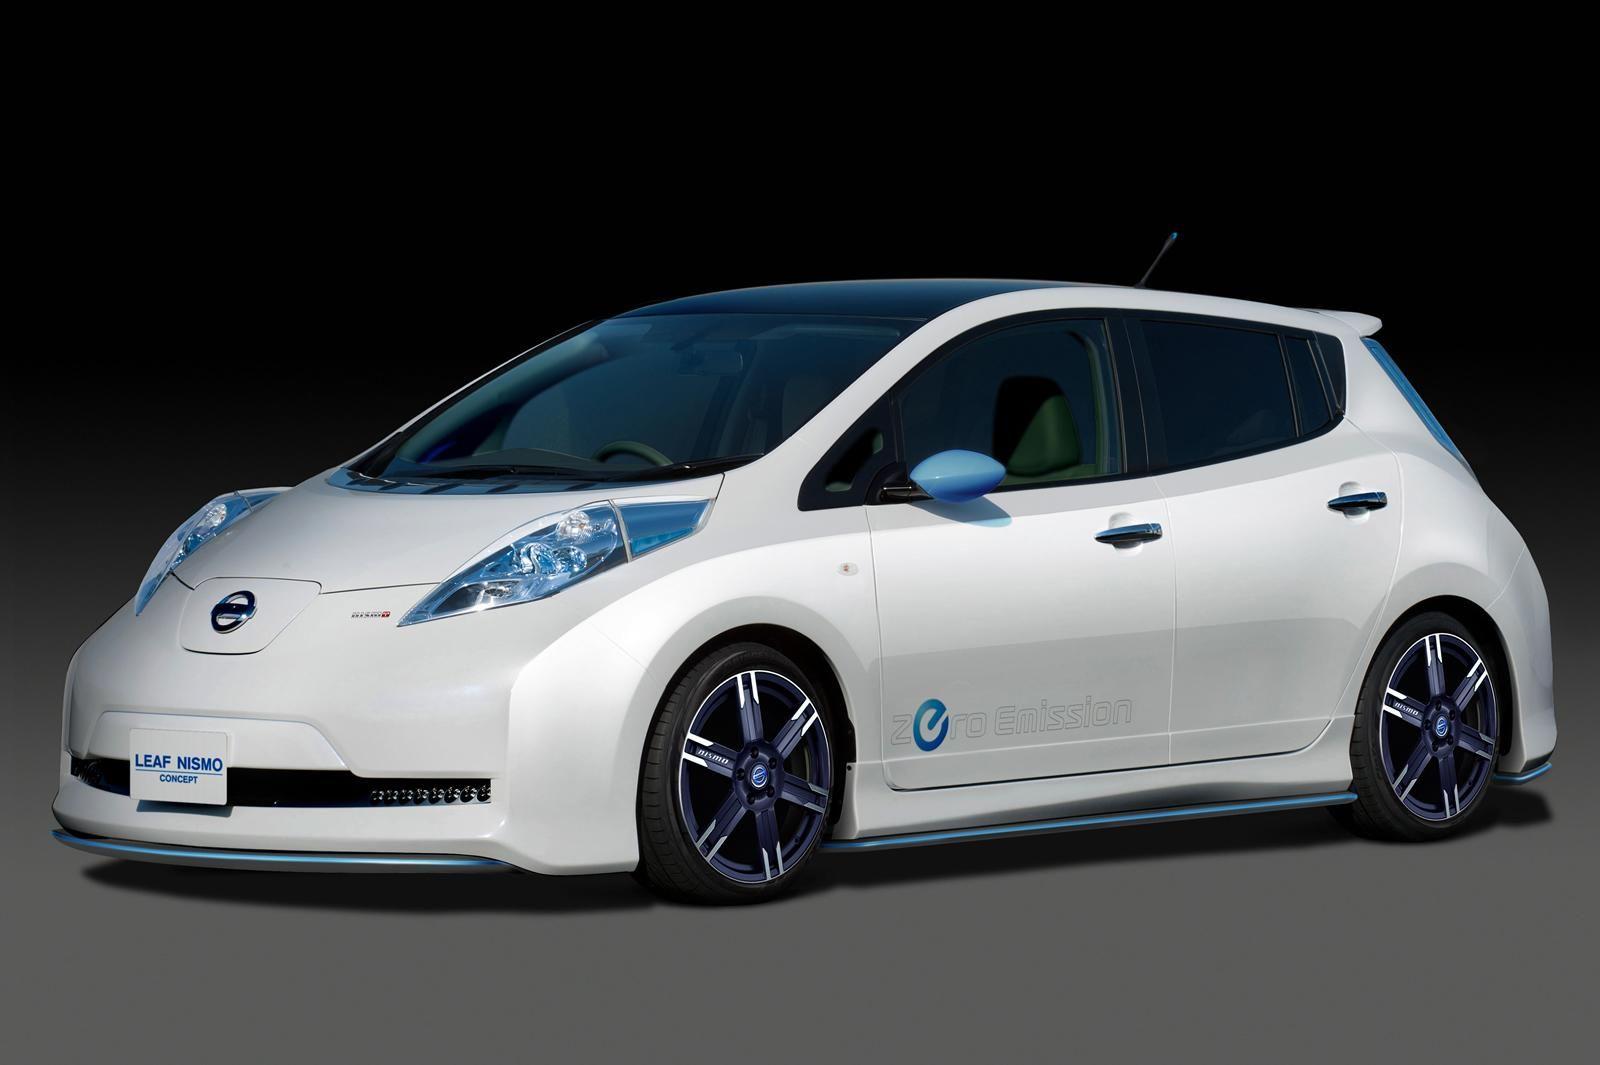 Nissan Leaf Nismo Concept photo pictures at high resolution